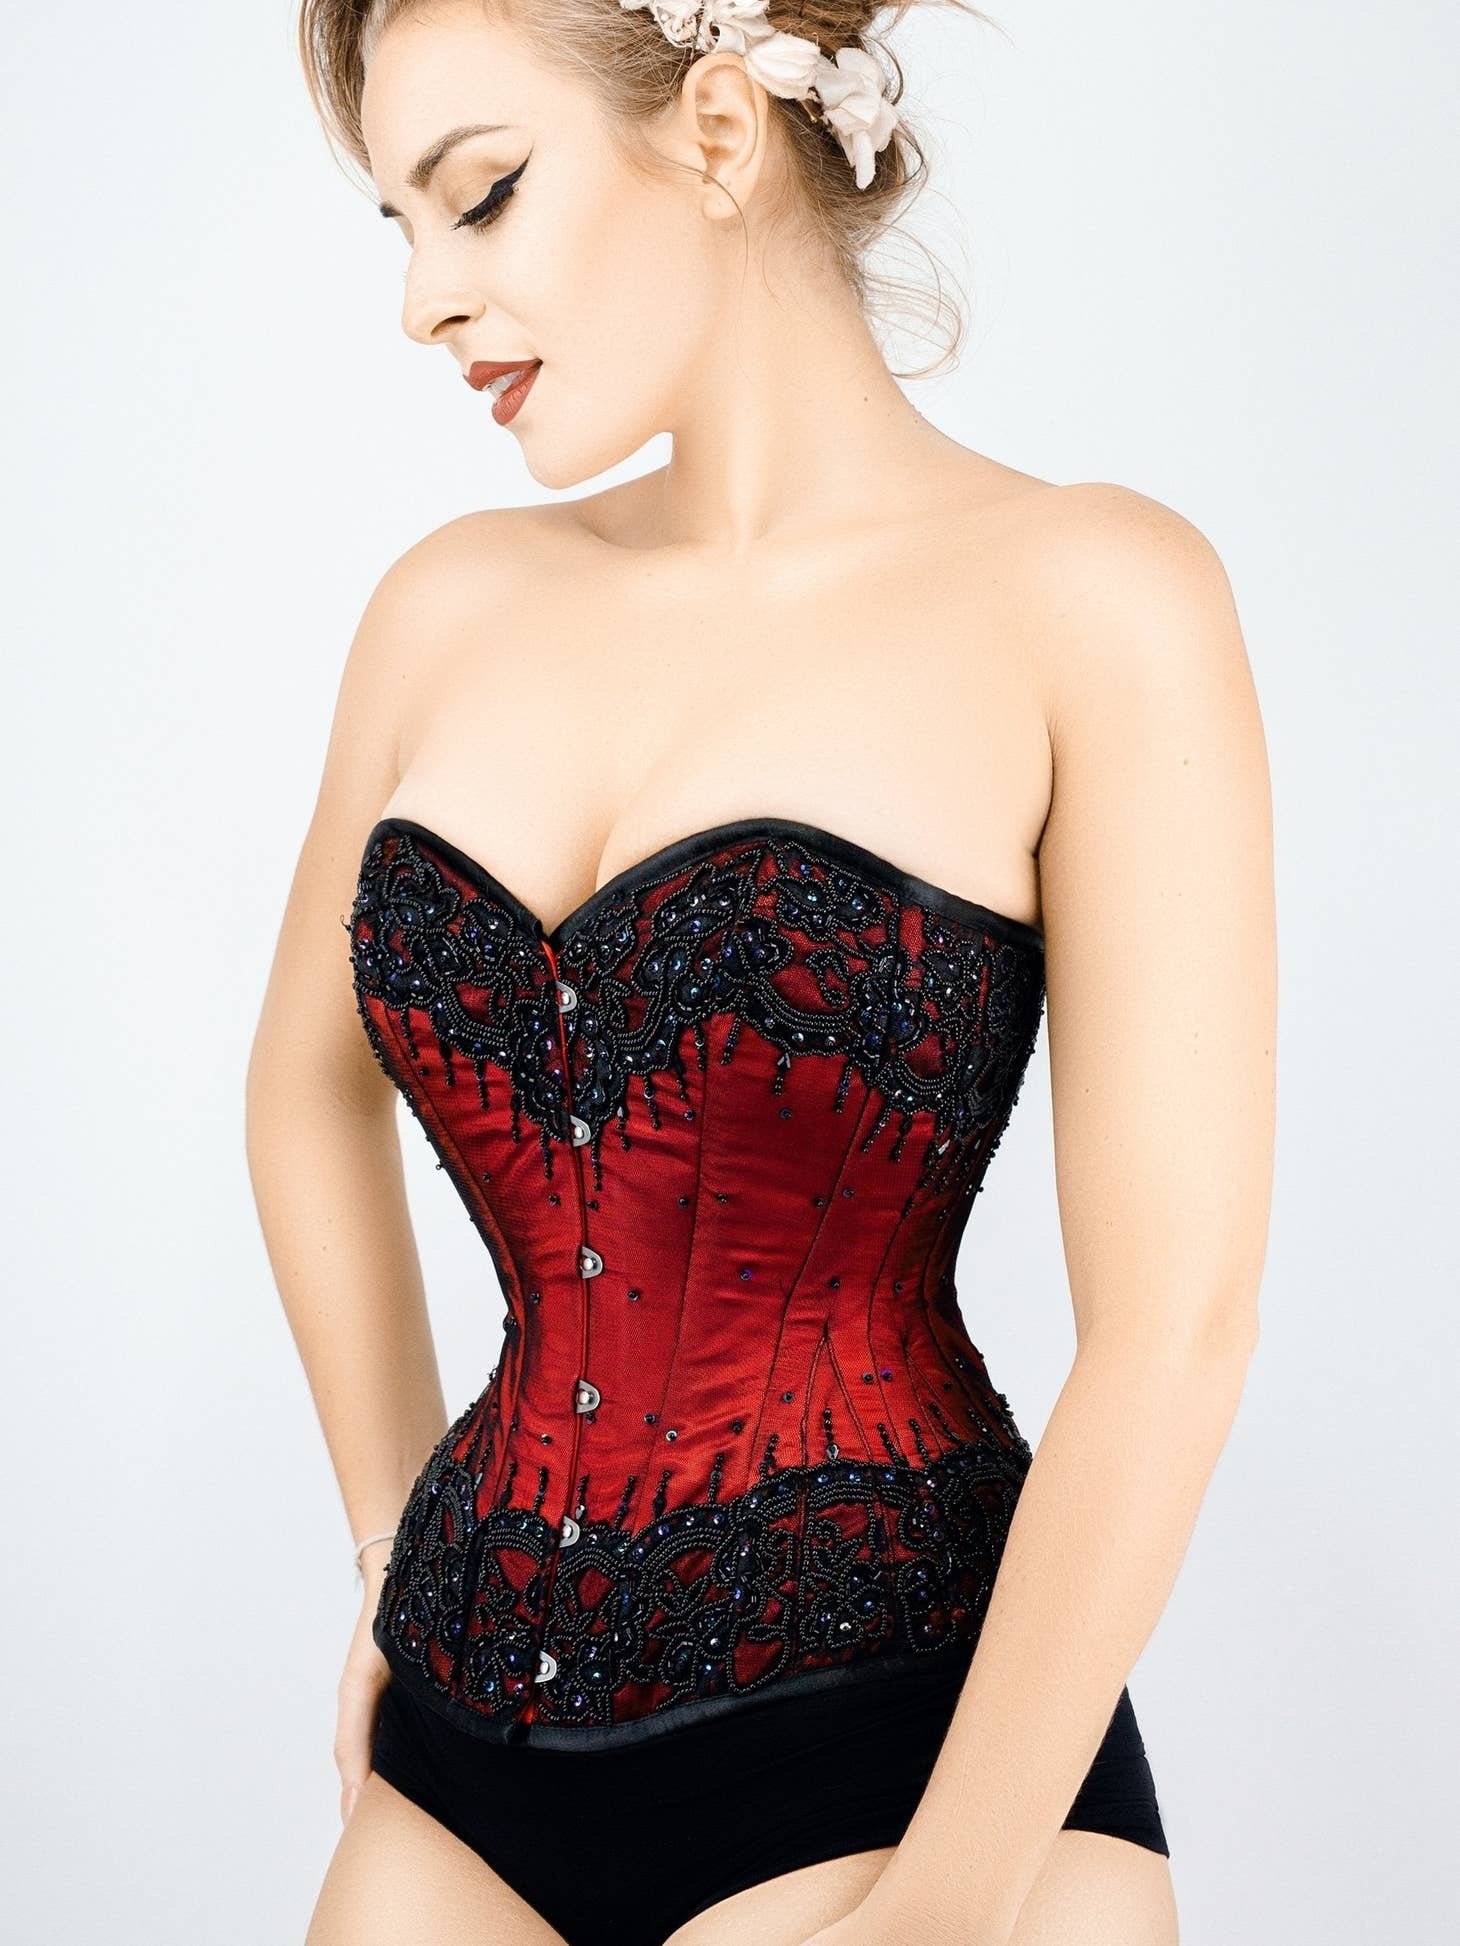 Red & Black💋, Corset (by Corset Story) with some shiny …